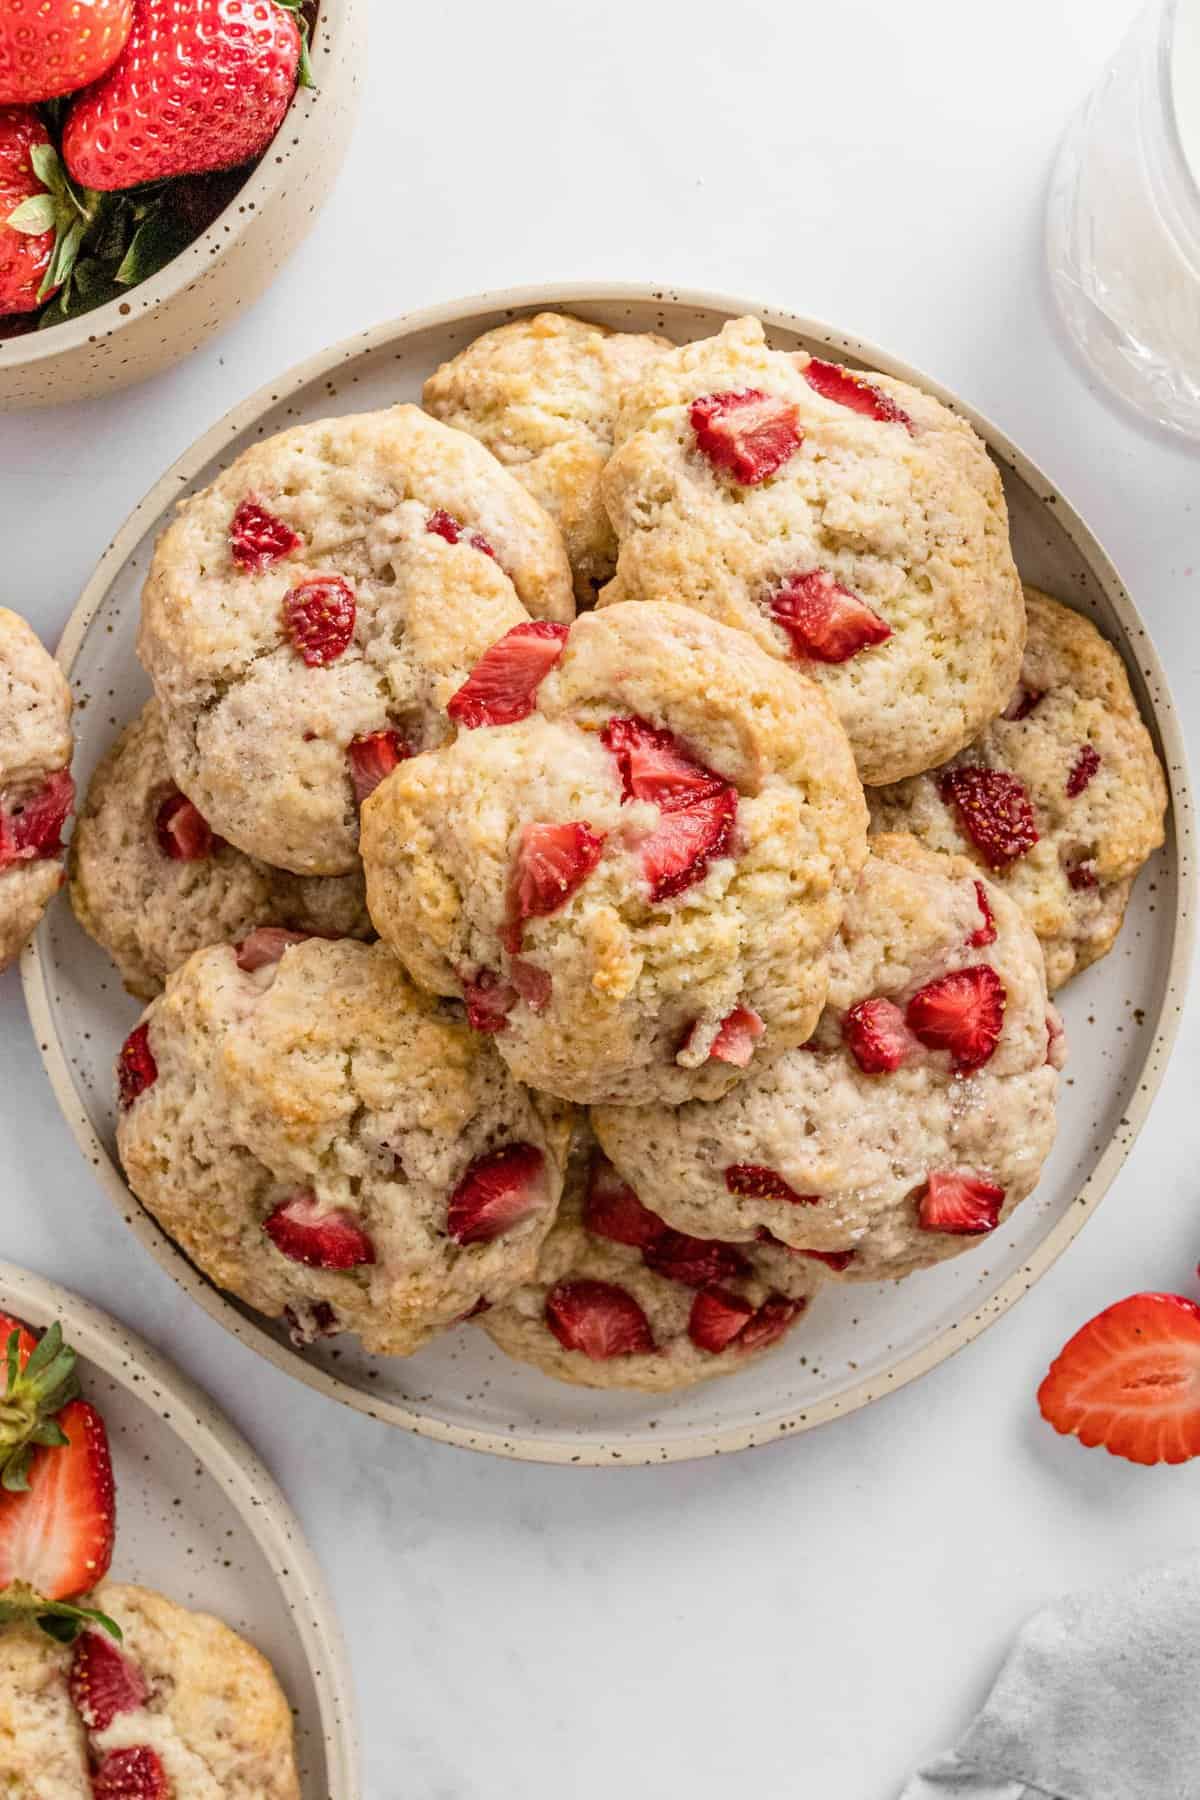 Cookies on round plate with bowl of strawberries in corner.